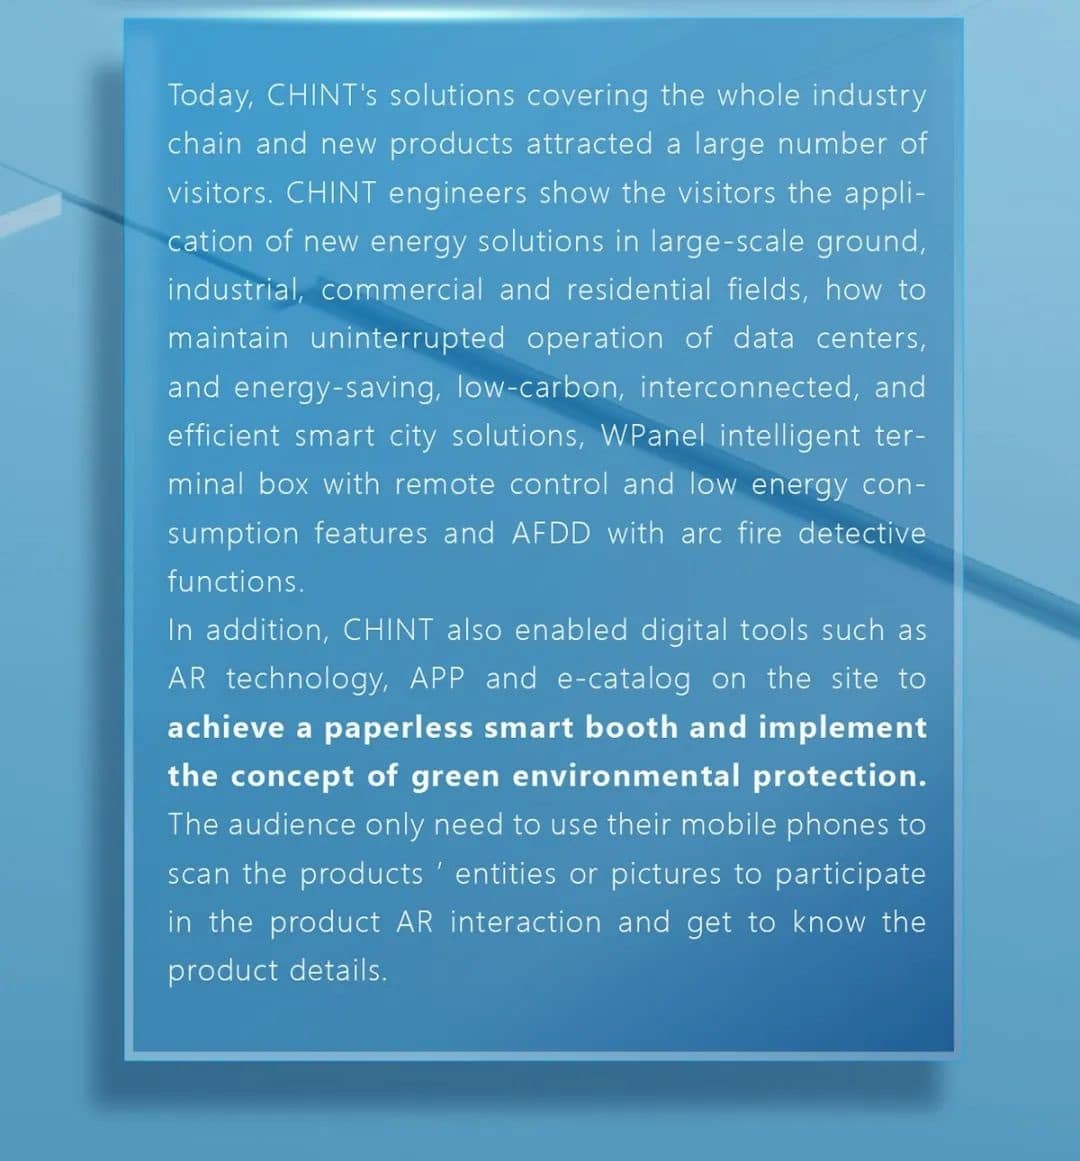 CHINT's solutions covering the whole industry chain